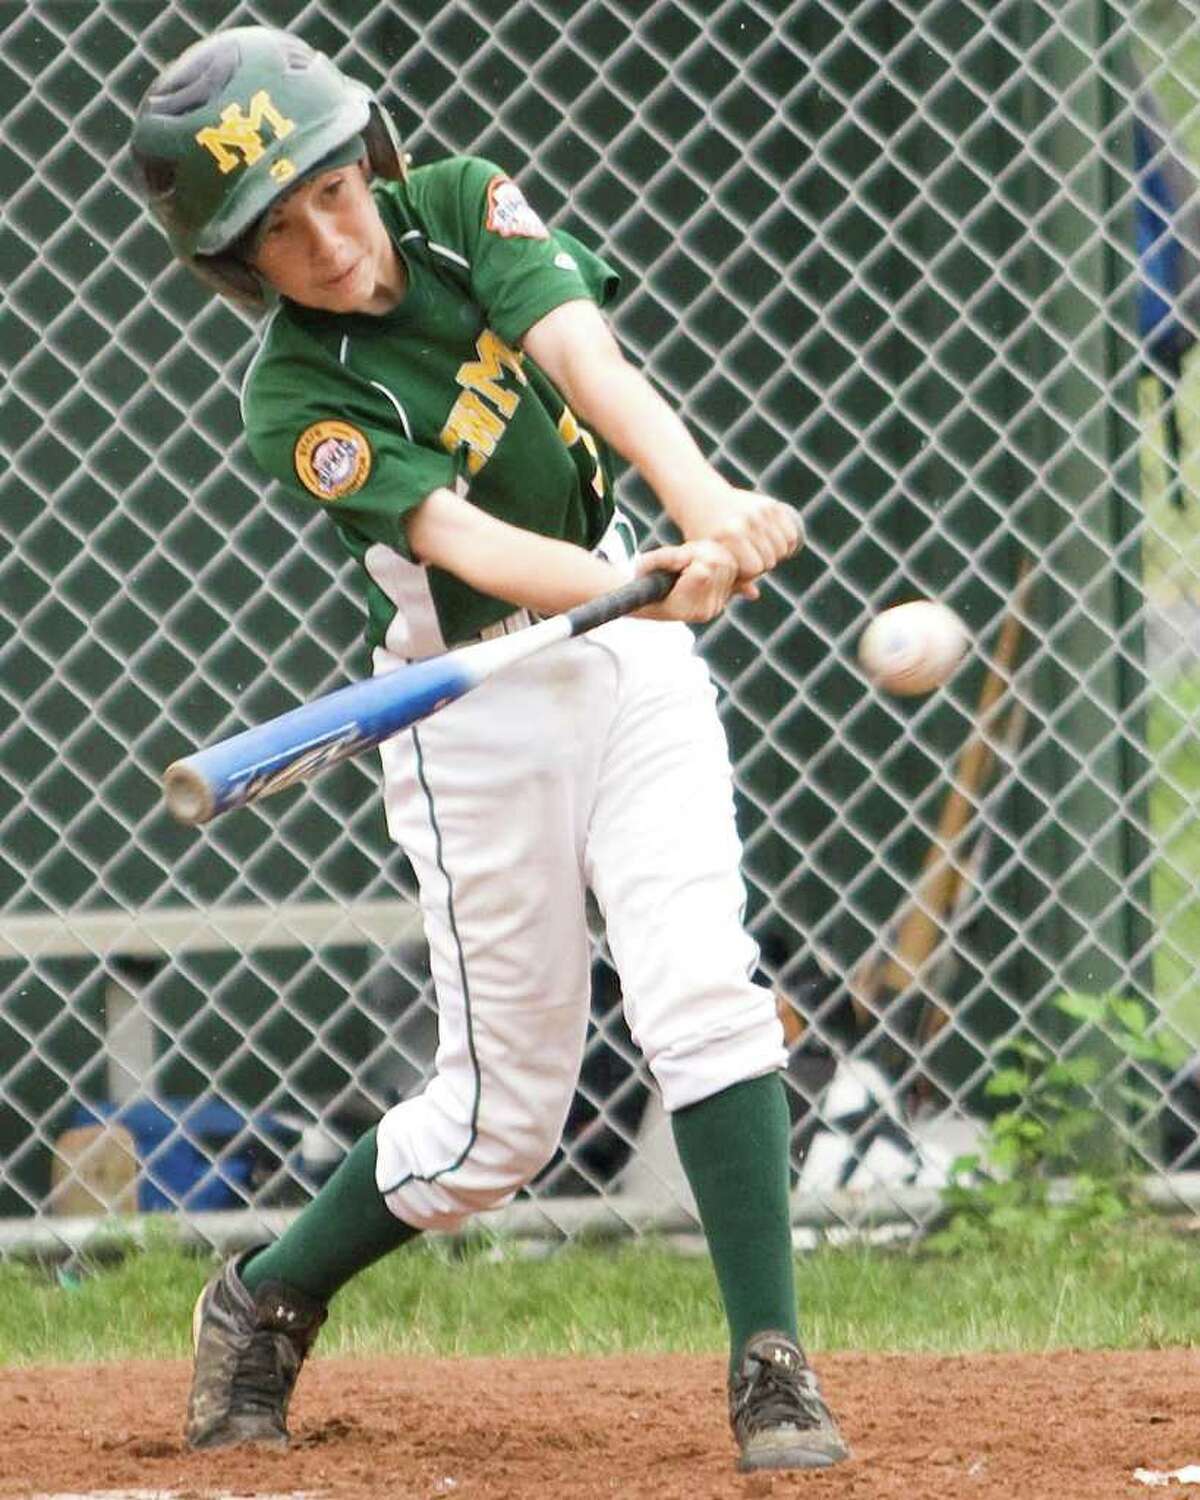 New Milford's Paul Dobies singles in a run against Exeter, N.H., in the Cal Ripken 11-year-old New England Regional Tournament Thursday in New Milford.